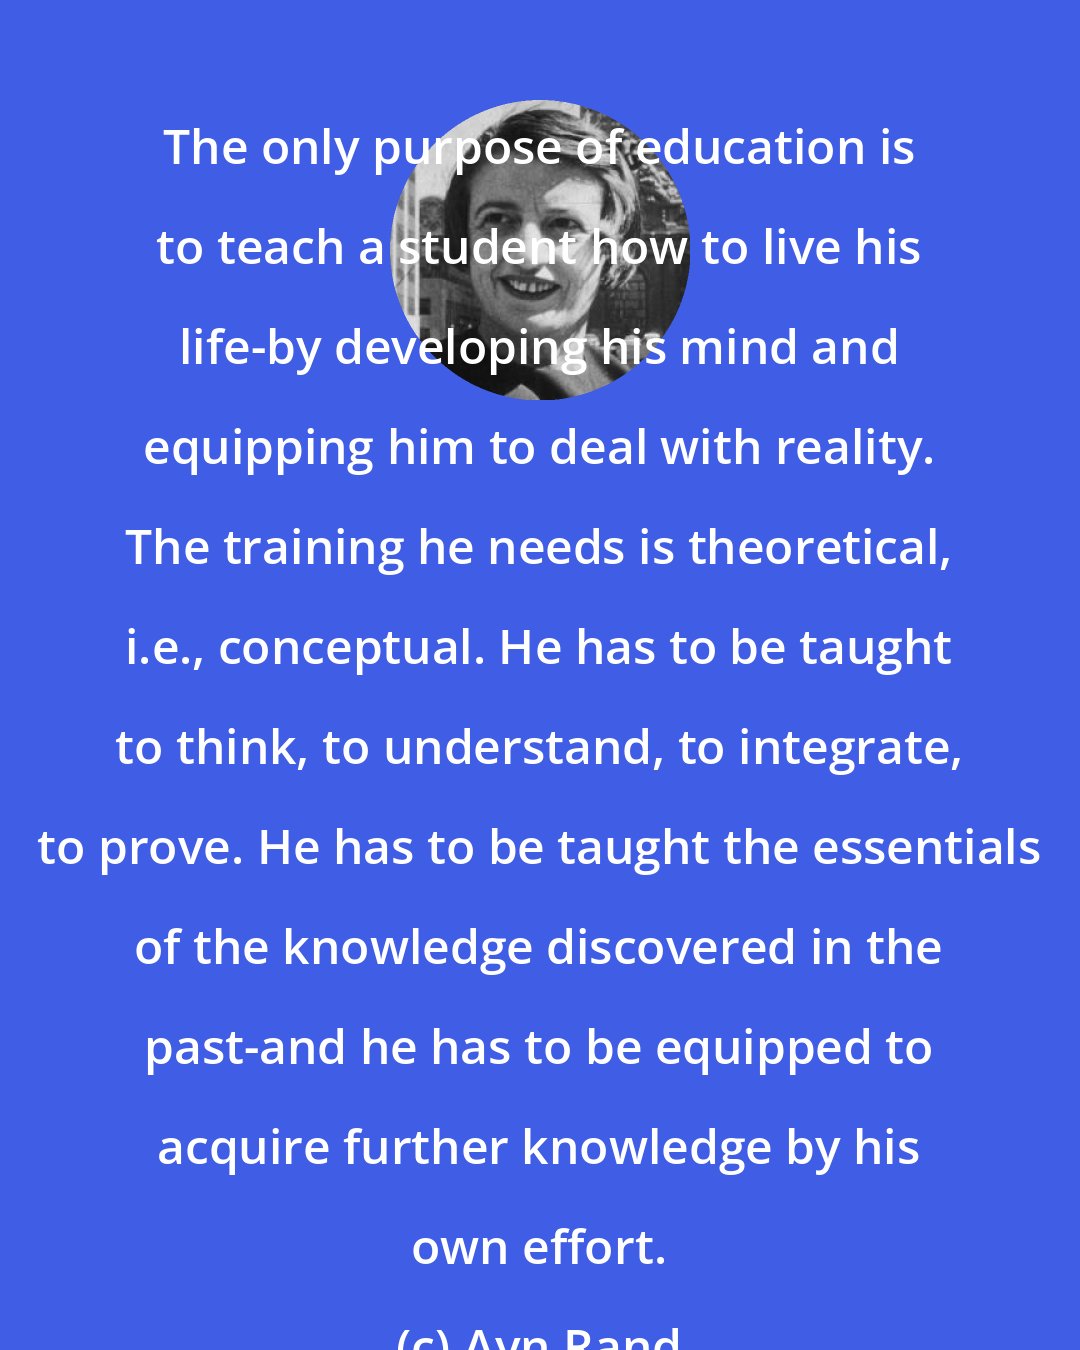 Ayn Rand: The only purpose of education is to teach a student how to live his life-by developing his mind and equipping him to deal with reality. The training he needs is theoretical, i.e., conceptual. He has to be taught to think, to understand, to integrate, to prove. He has to be taught the essentials of the knowledge discovered in the past-and he has to be equipped to acquire further knowledge by his own effort.